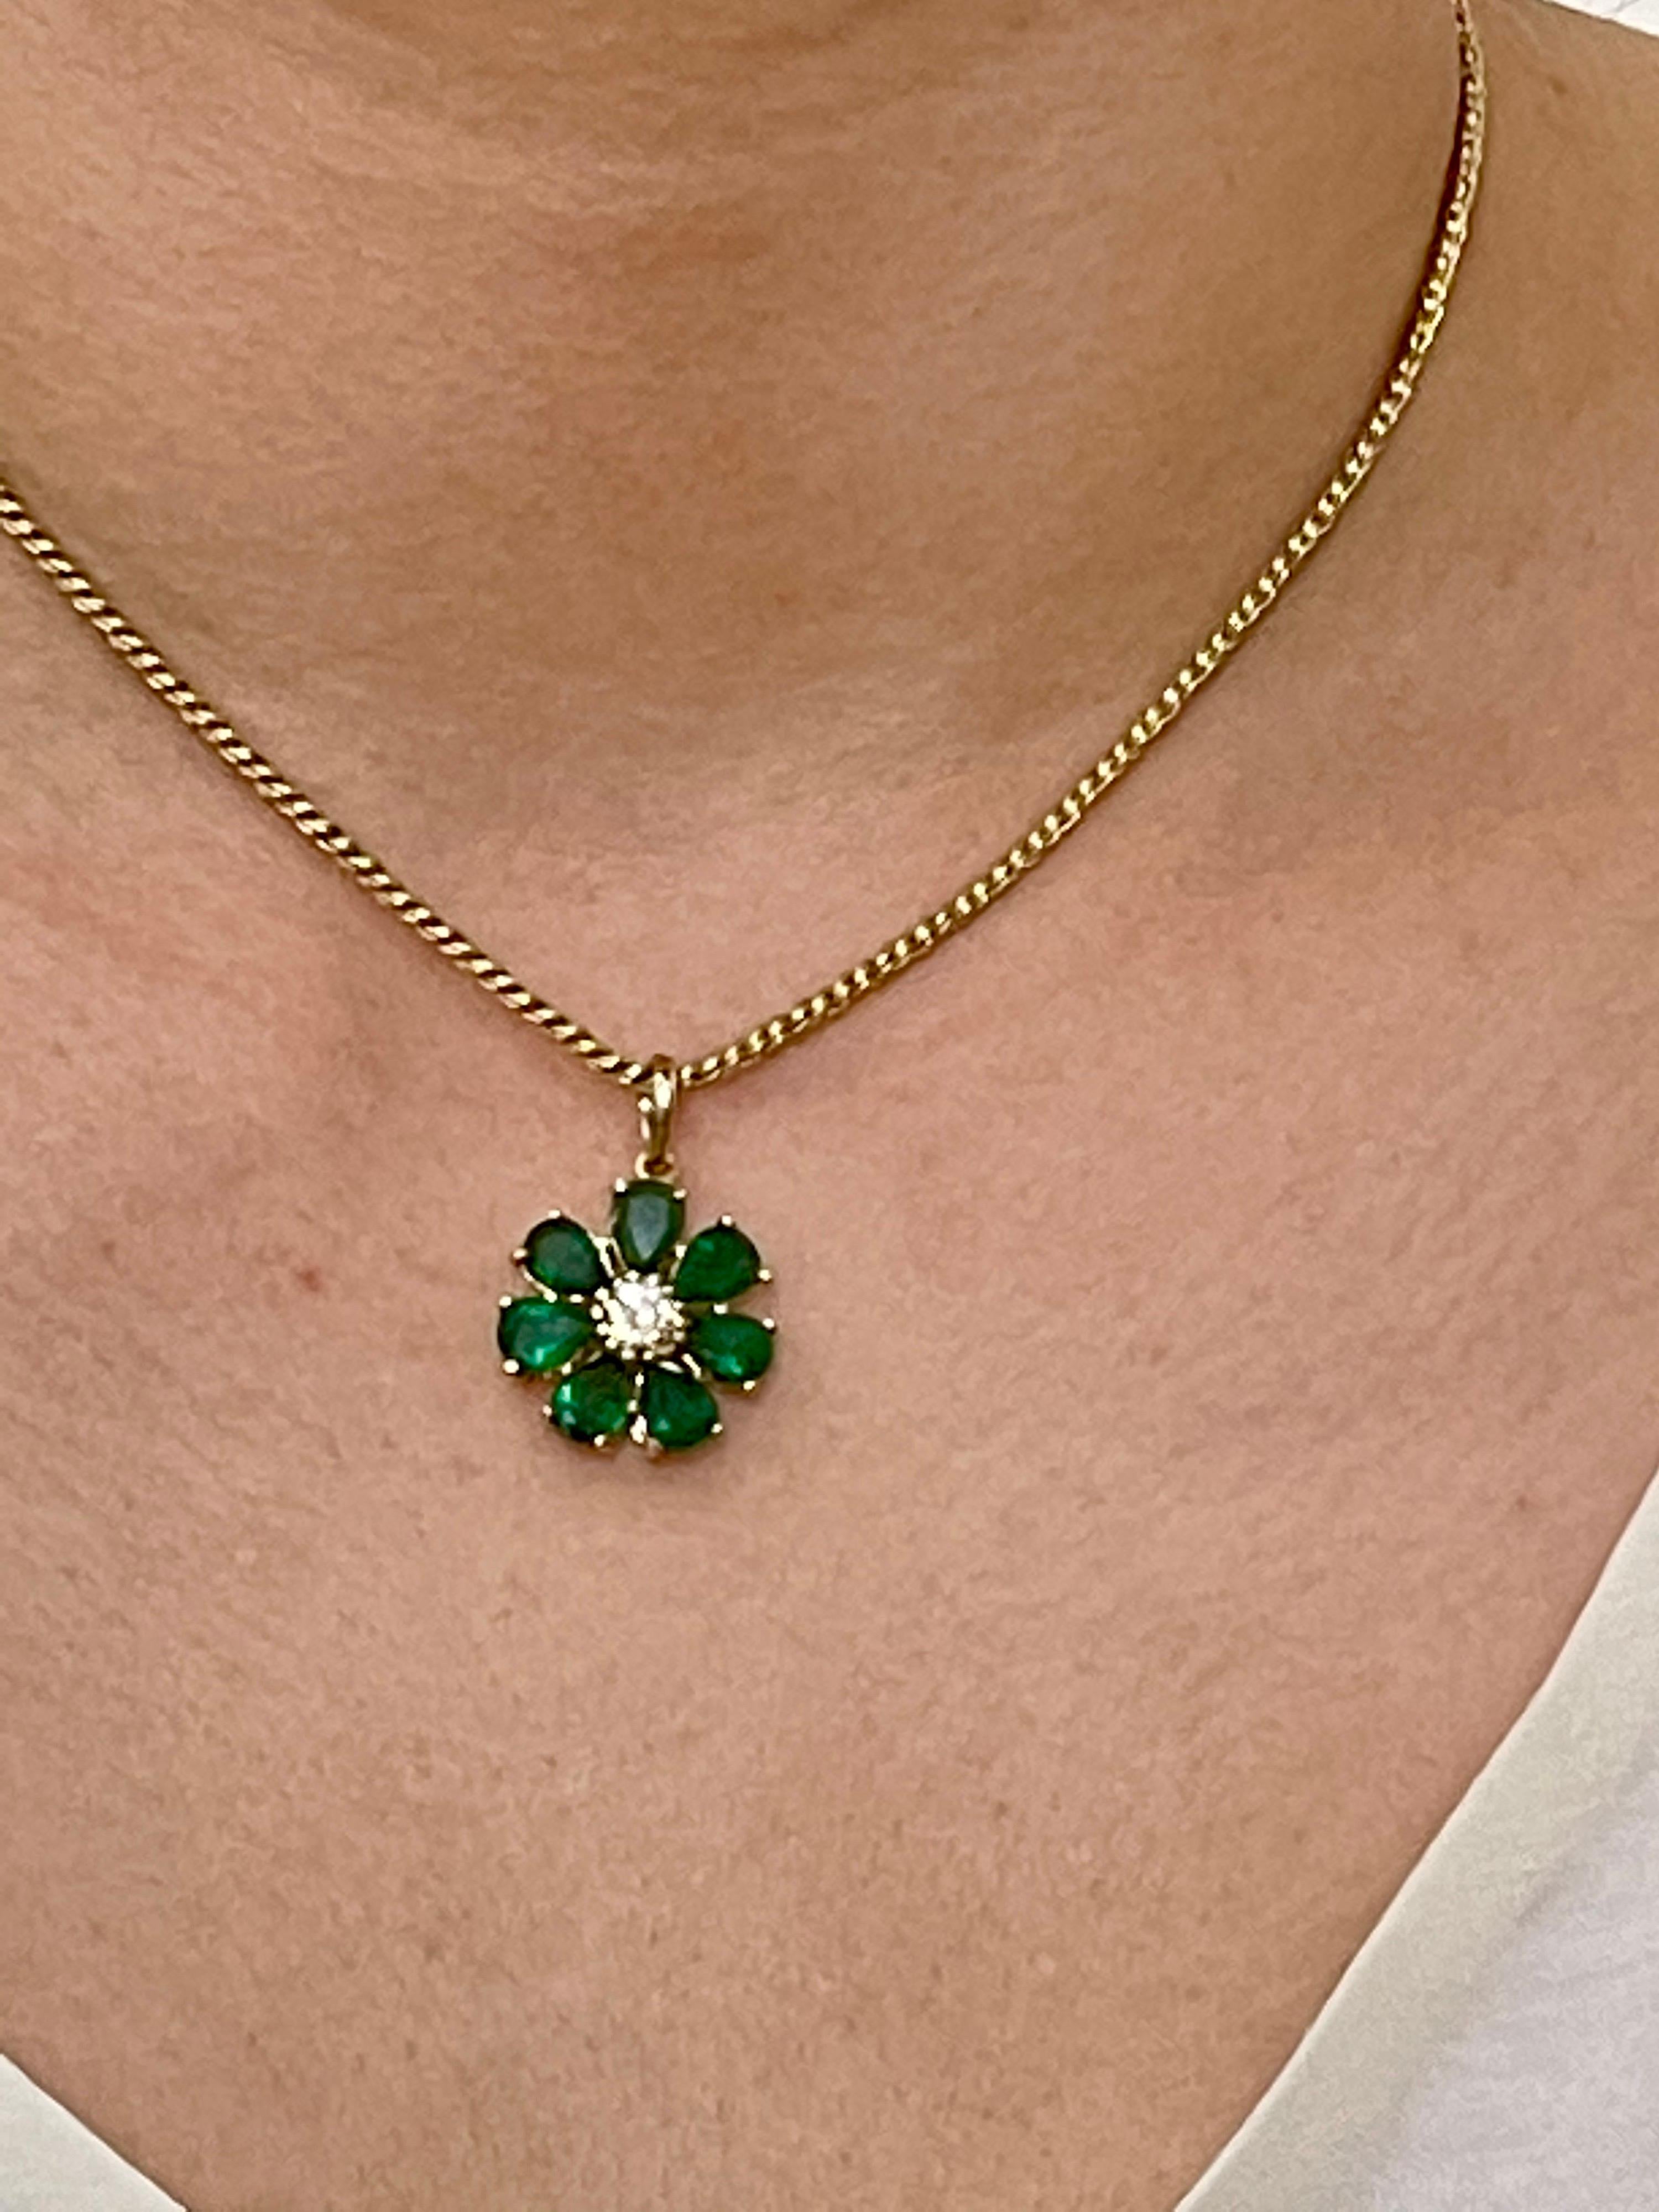 Emerald and Solitaire Diamonds Flower Pendant Necklace 14 Karat Yellow Gold In Excellent Condition For Sale In New York, NY